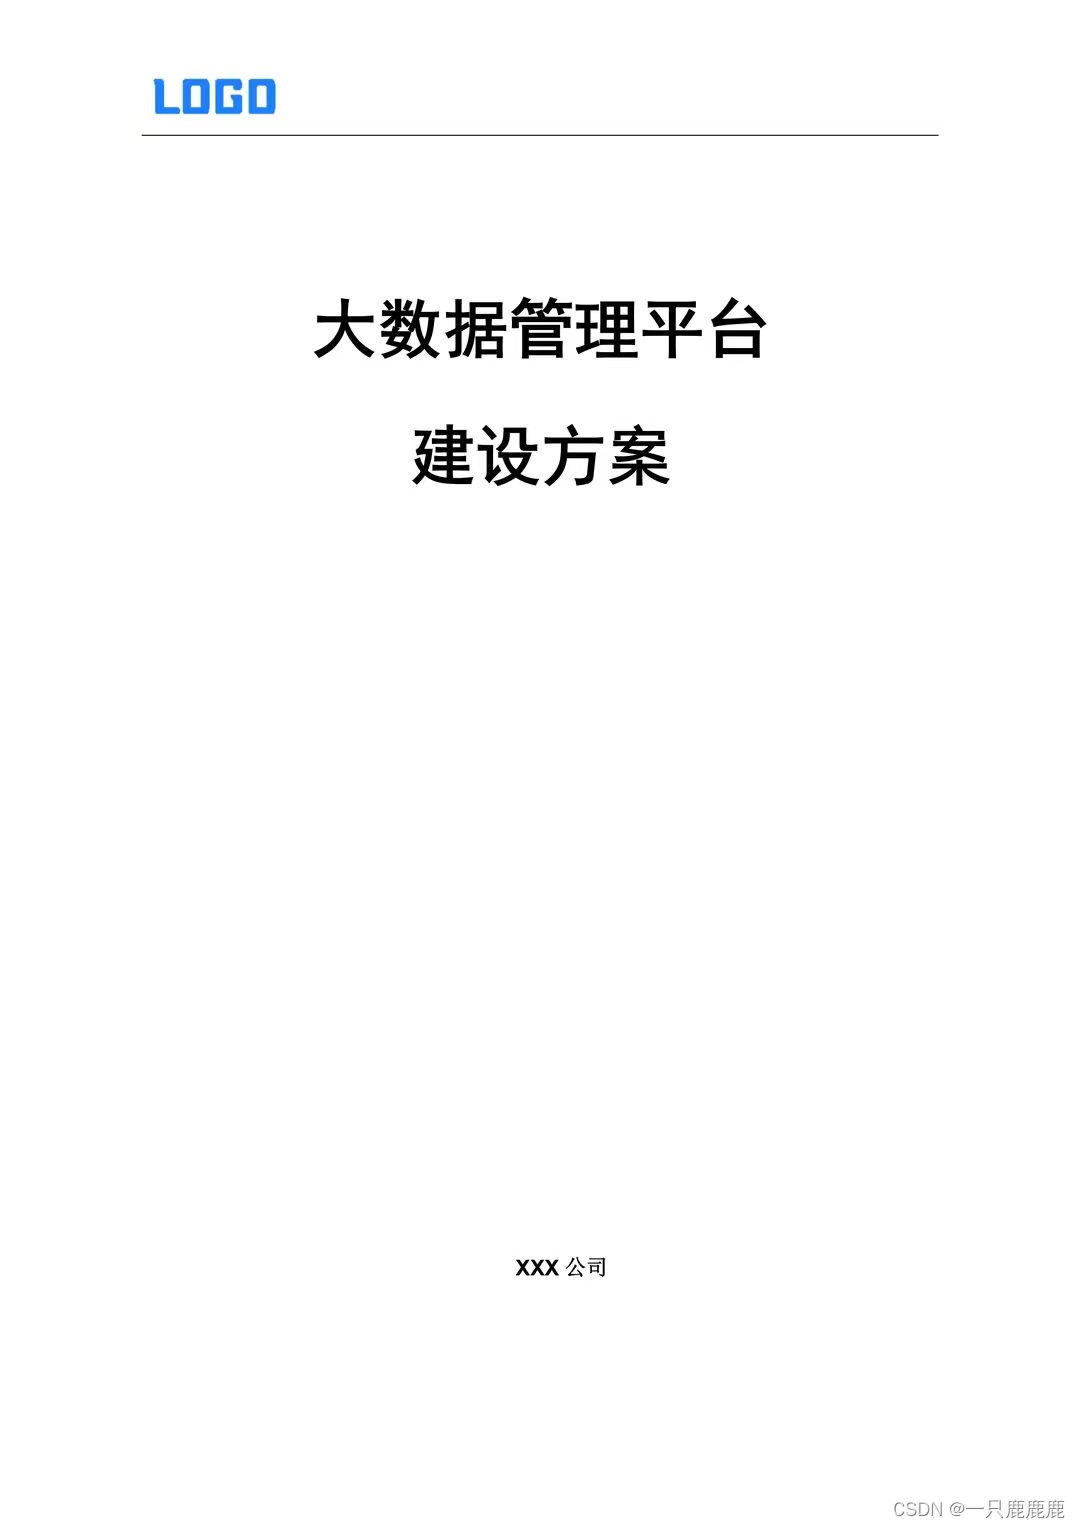 <span style='color:red;'>大</span><span style='color:red;'>数据</span>管理<span style='color:red;'>平台</span><span style='color:red;'>建设</span><span style='color:red;'>方案</span>书